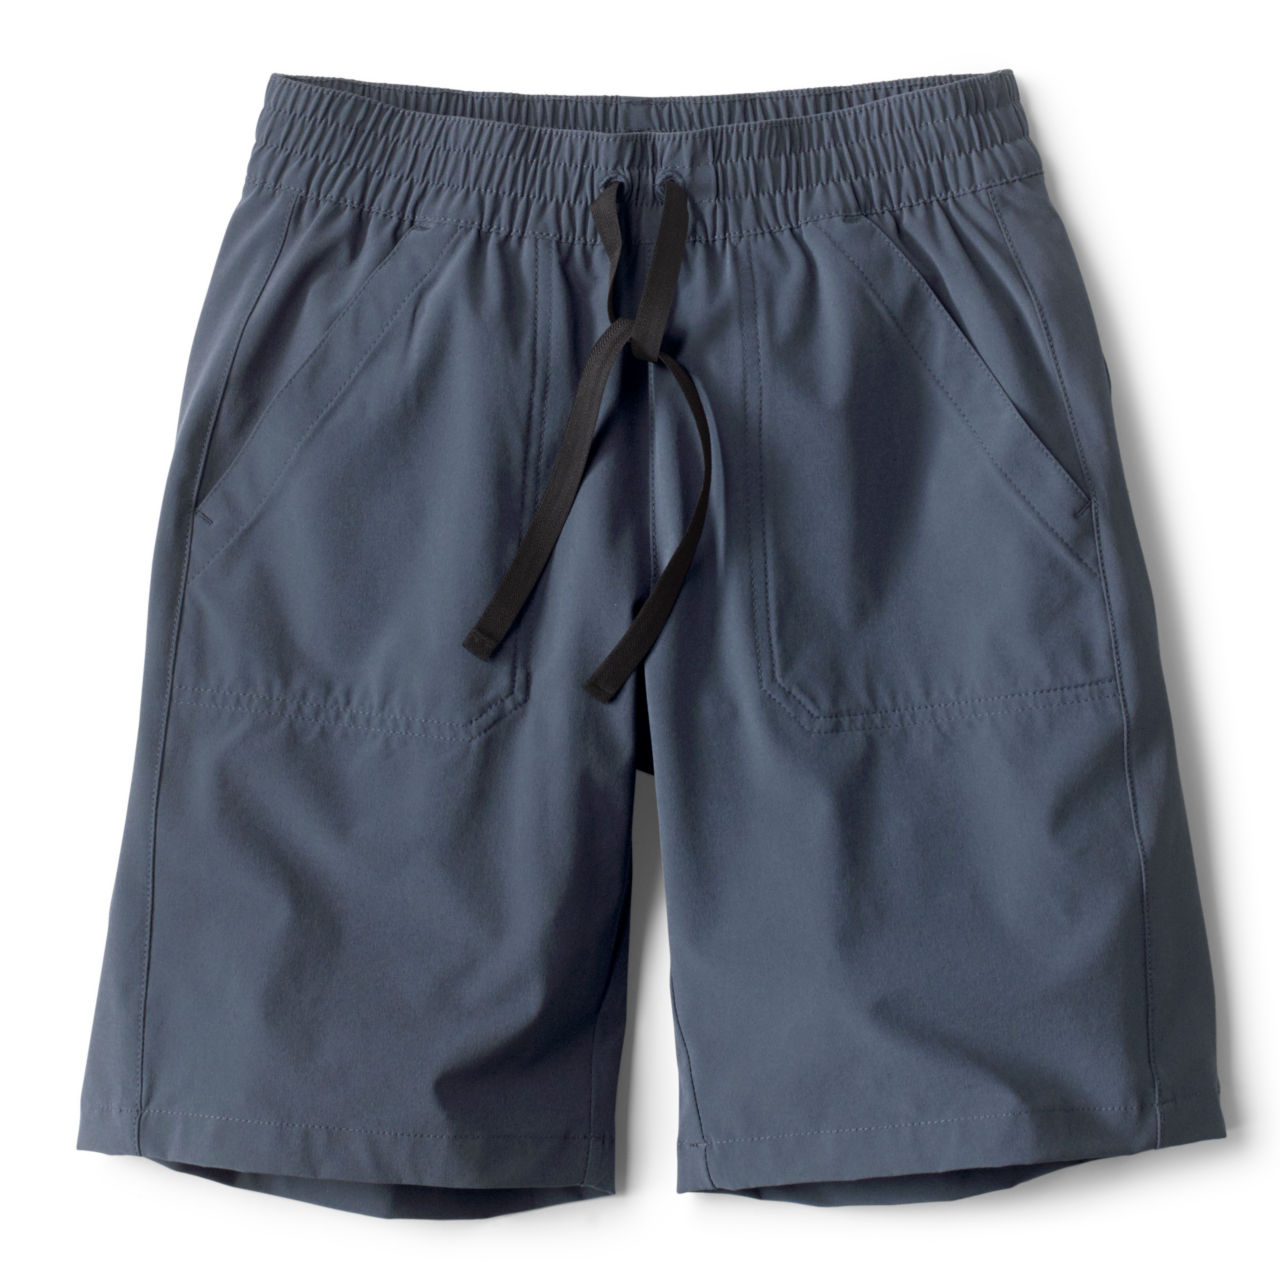 All-Around Relaxed Fit 8" Shorts - CARBON image number 0